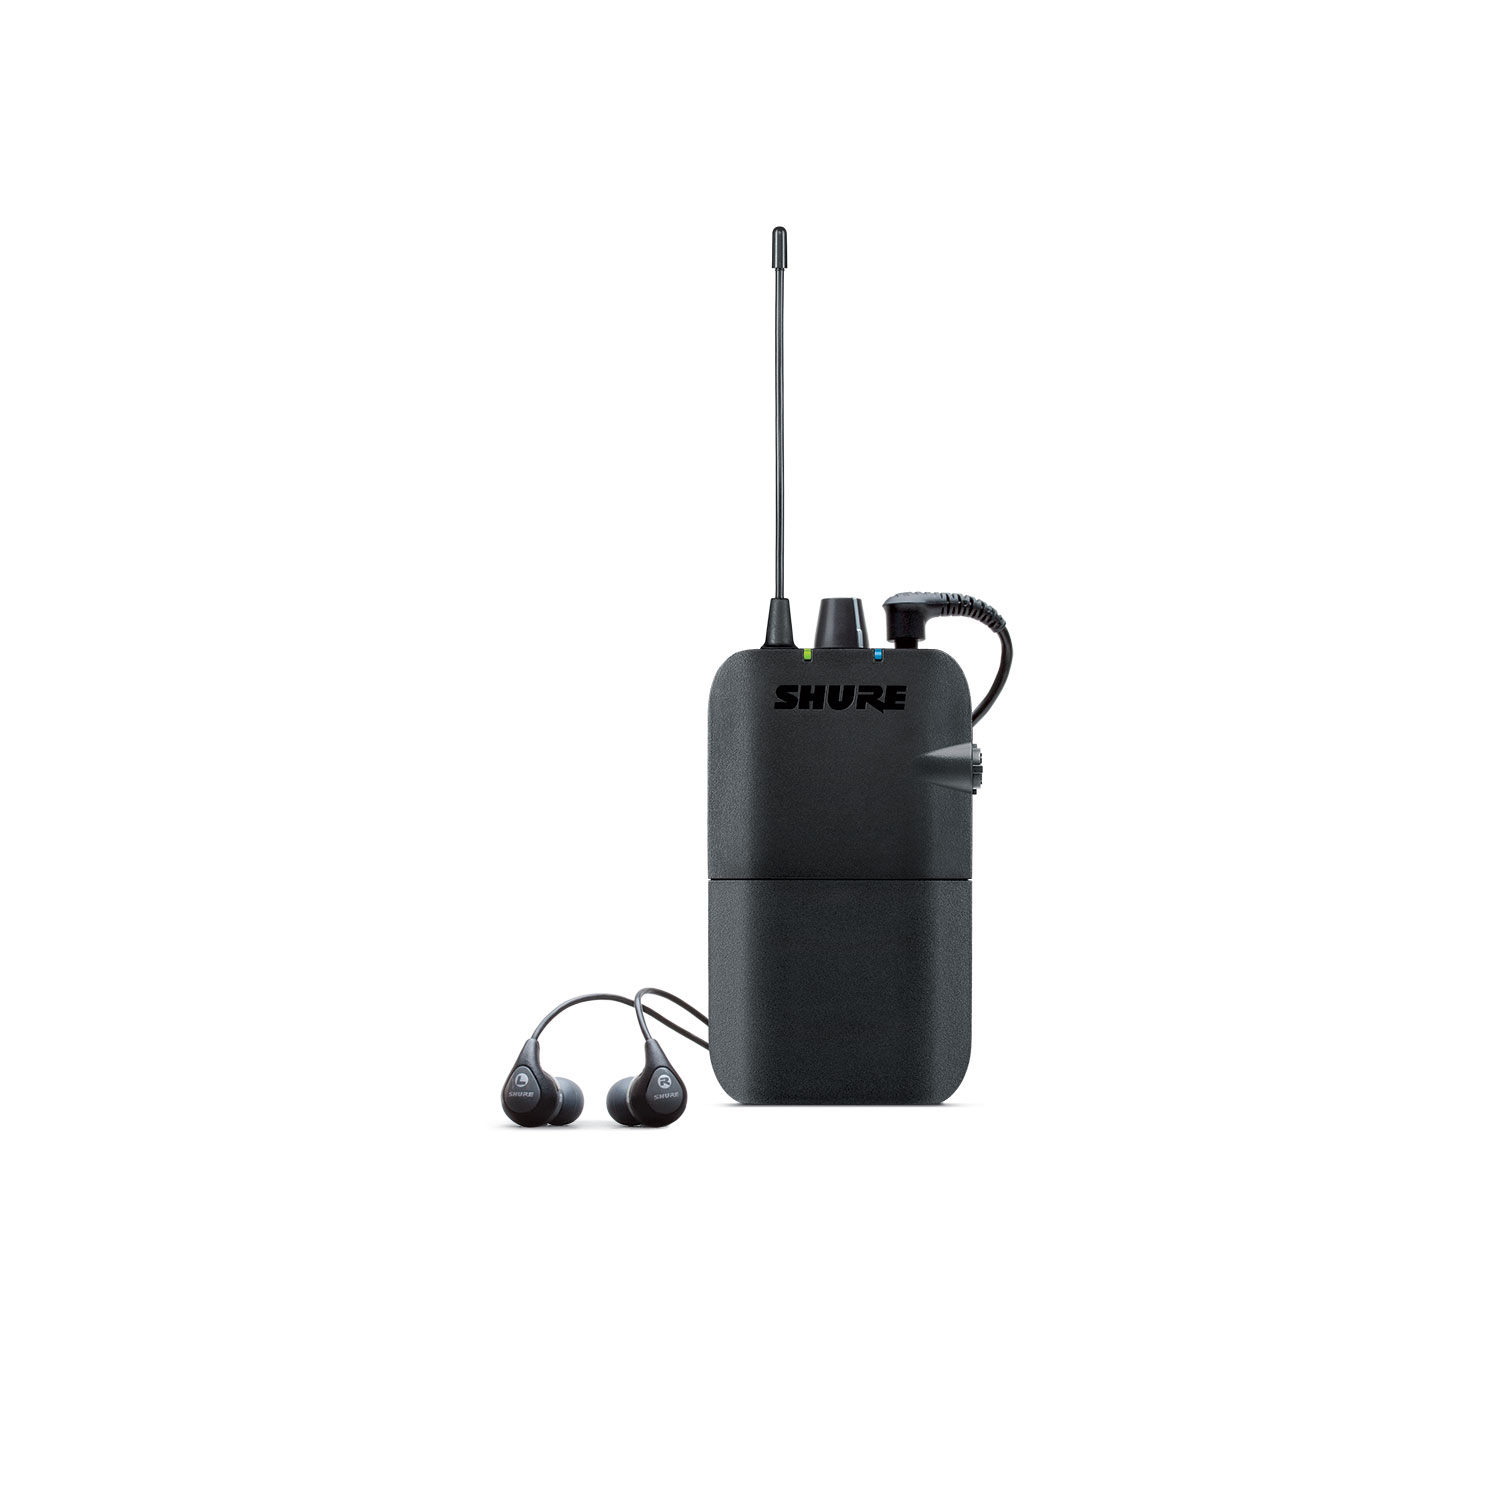 PSM 300 - In-Ear Personal Monitoring System - Shure USA